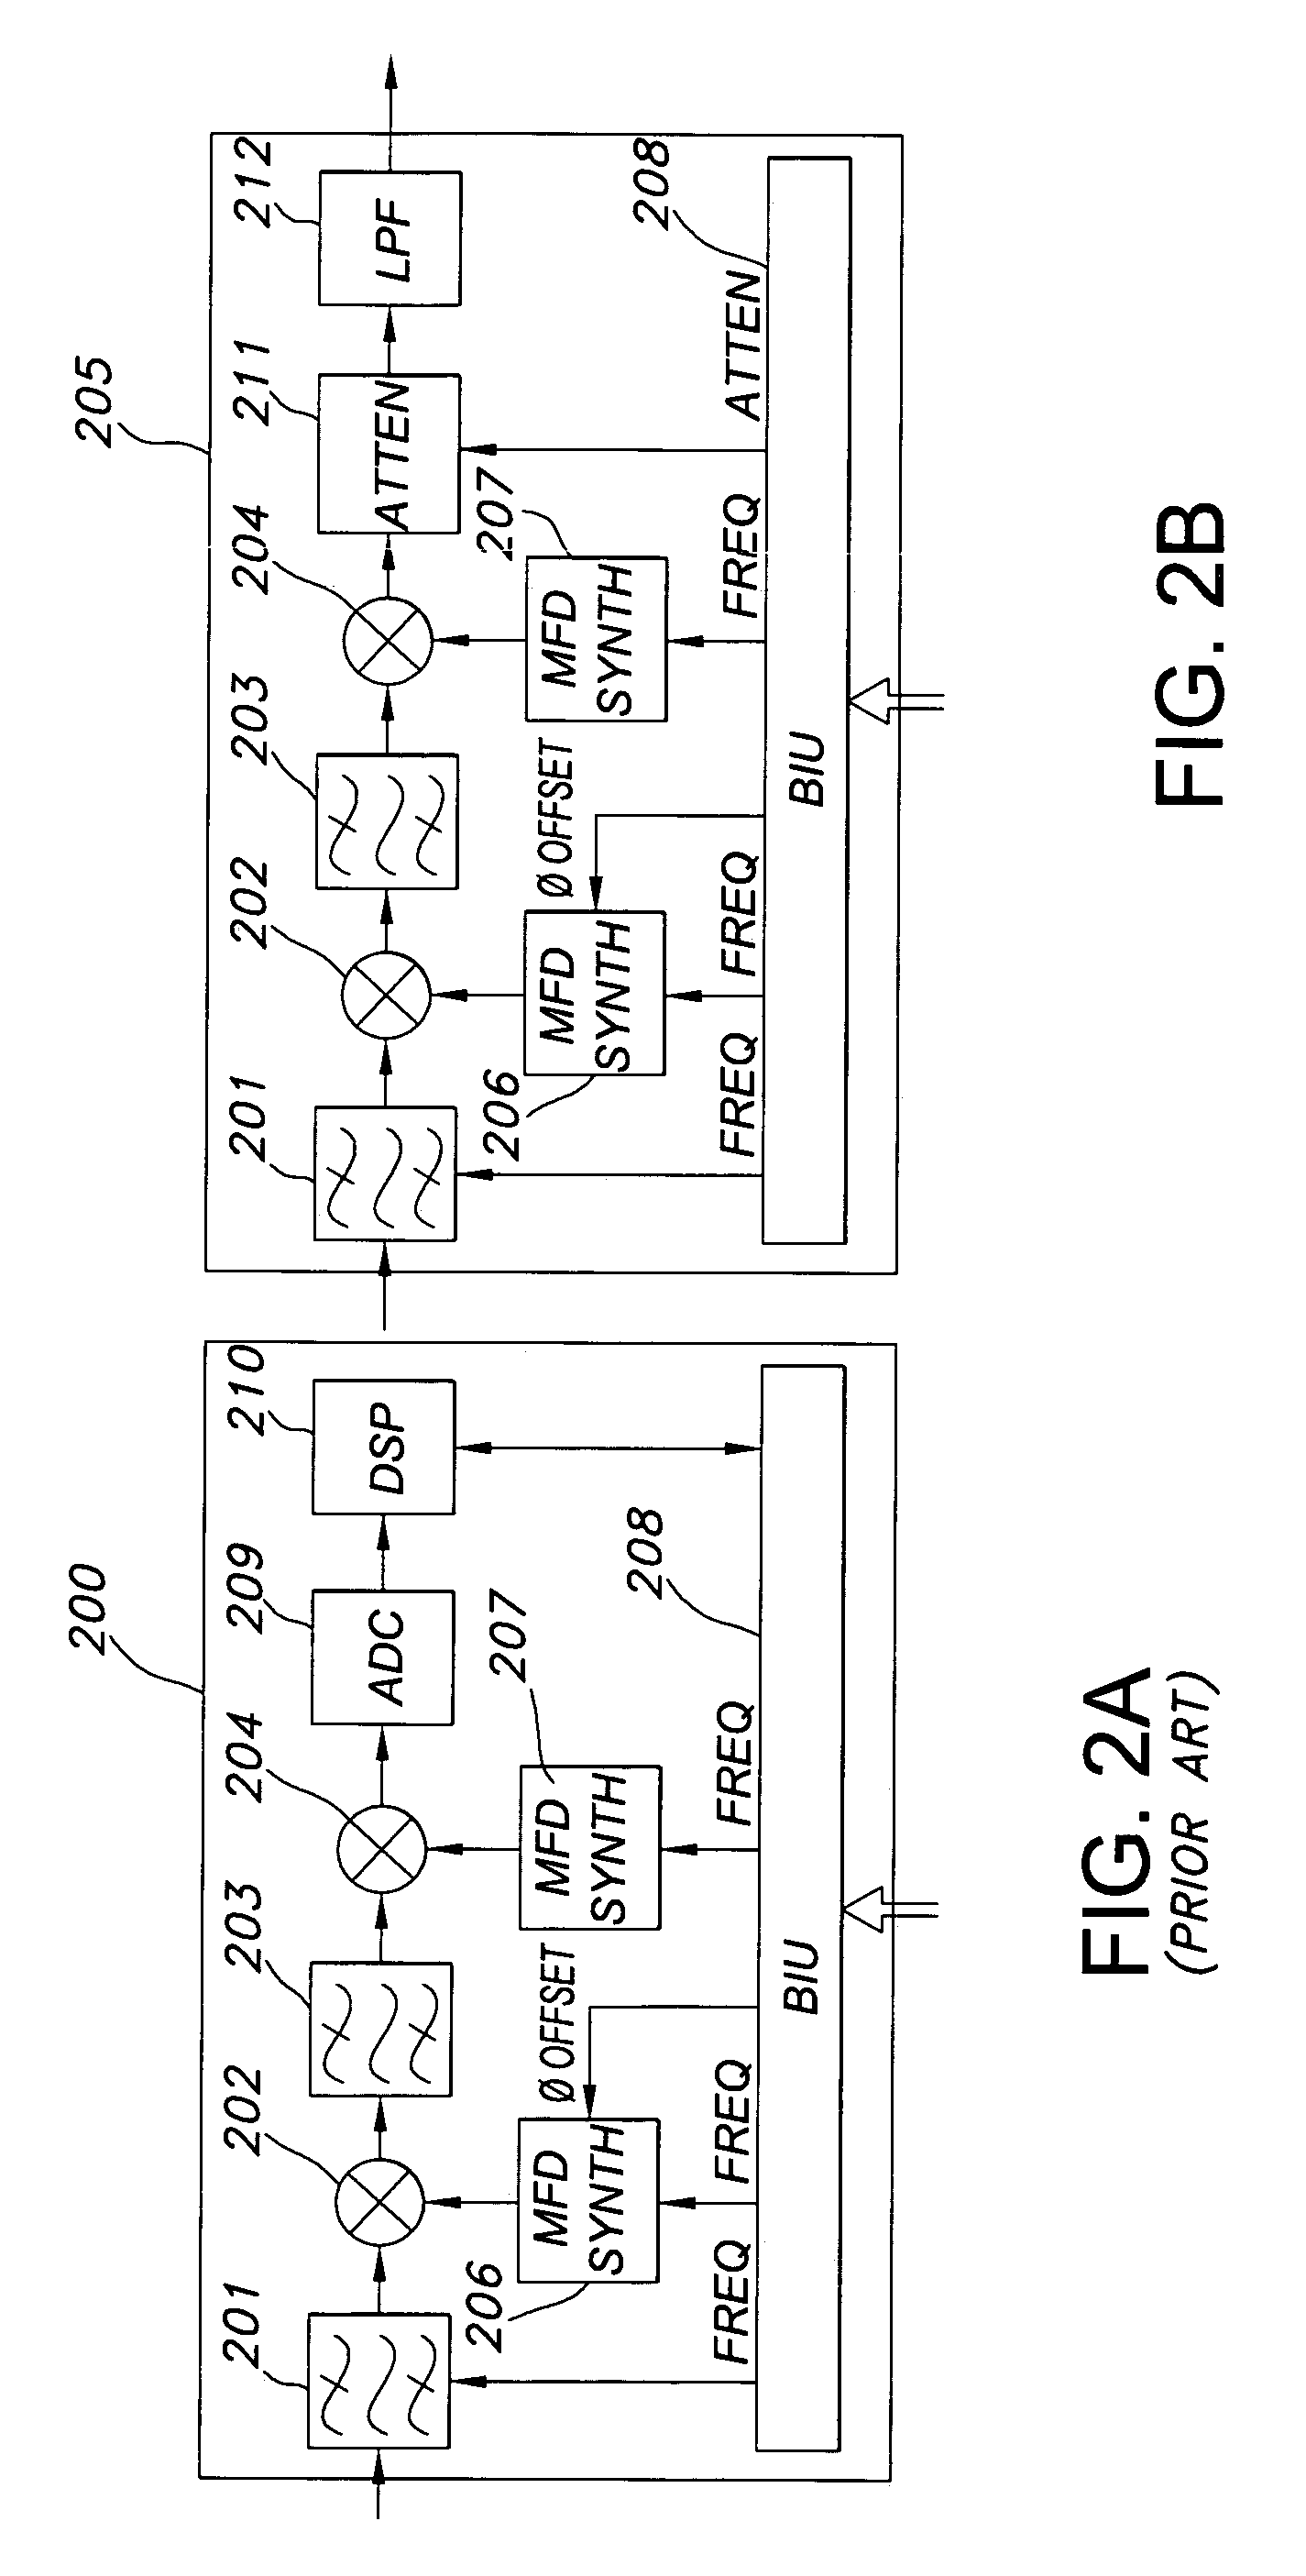 Adaptive interference cancellation receiving system using synthesizer phase accumulation